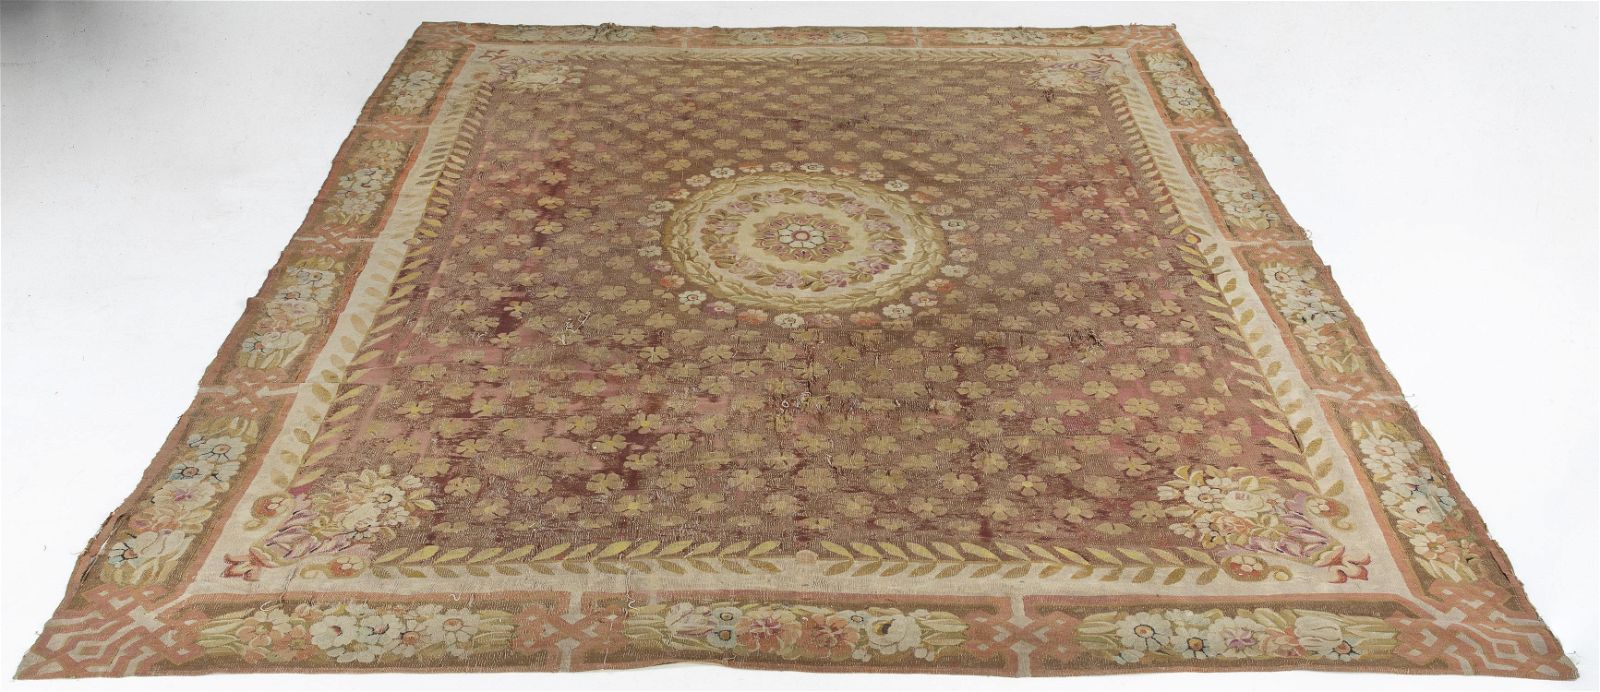 FRENCH AUBUSSON CARPET, 19TH CENTURYFrench